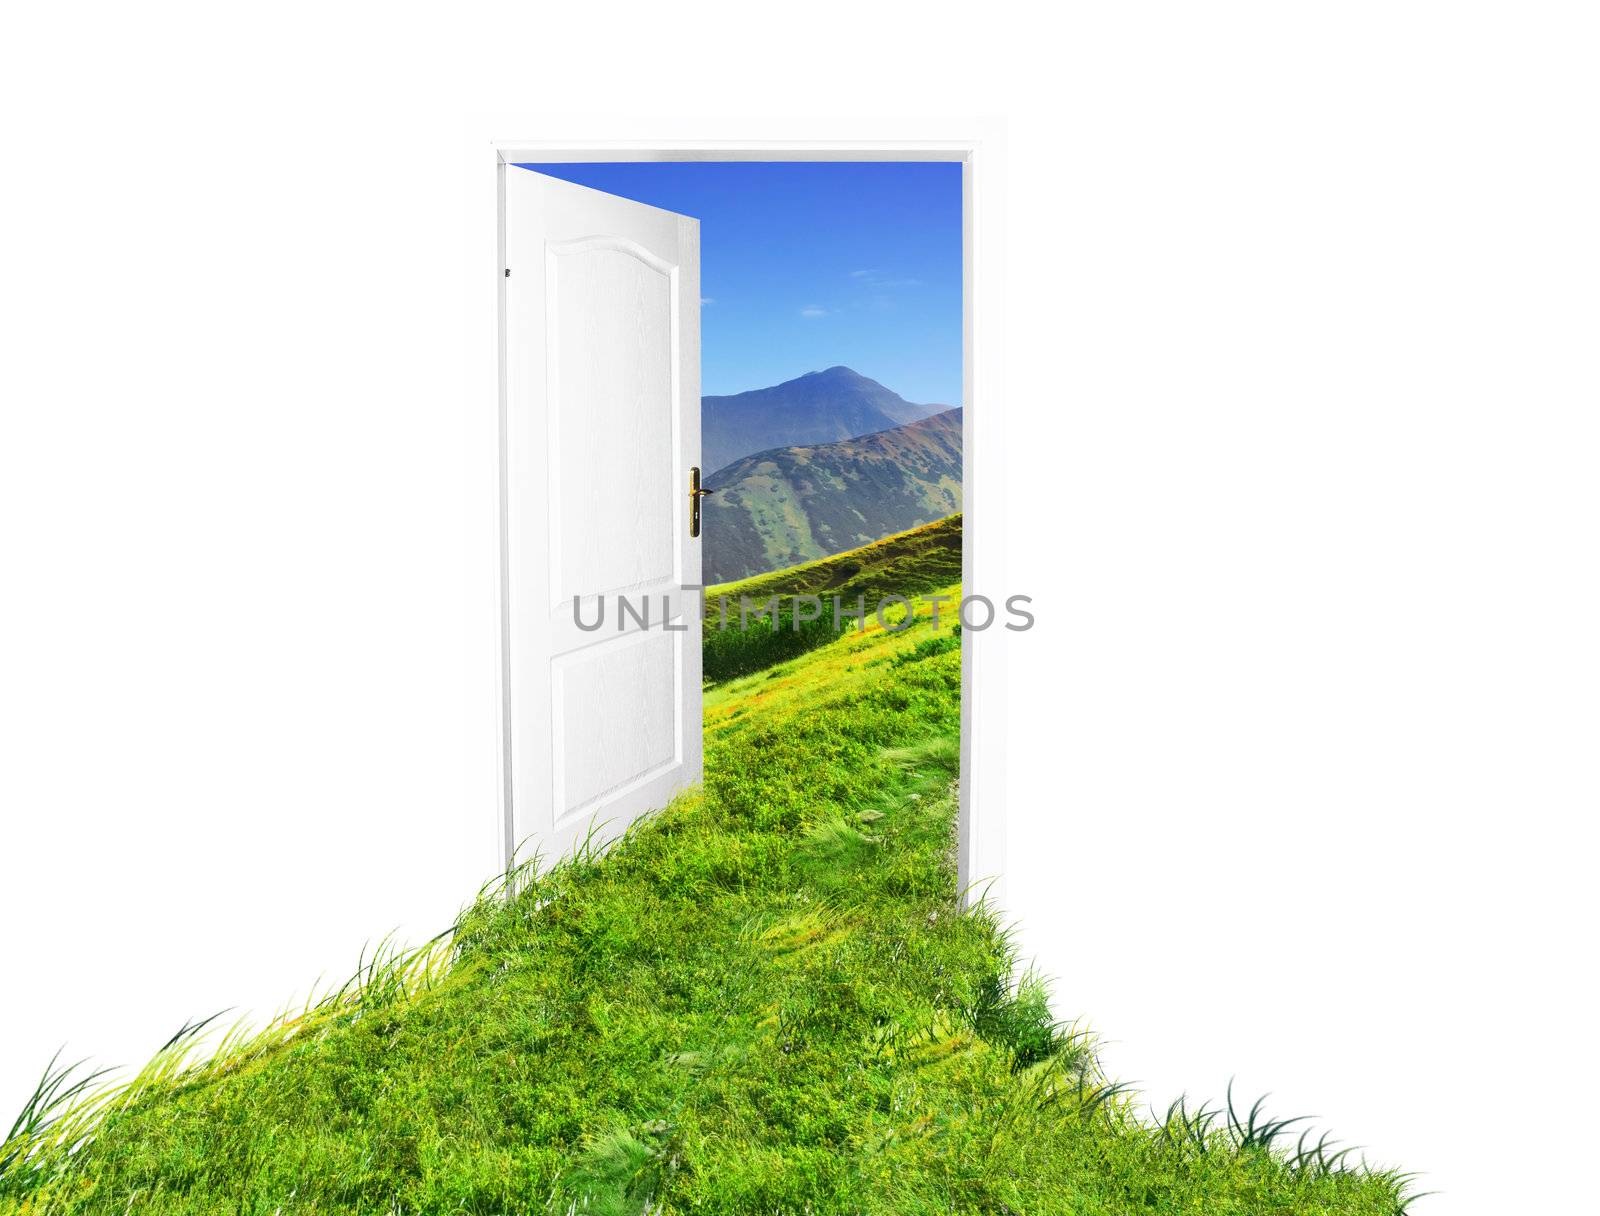 Door to new world. Easy editable image. See also different version.